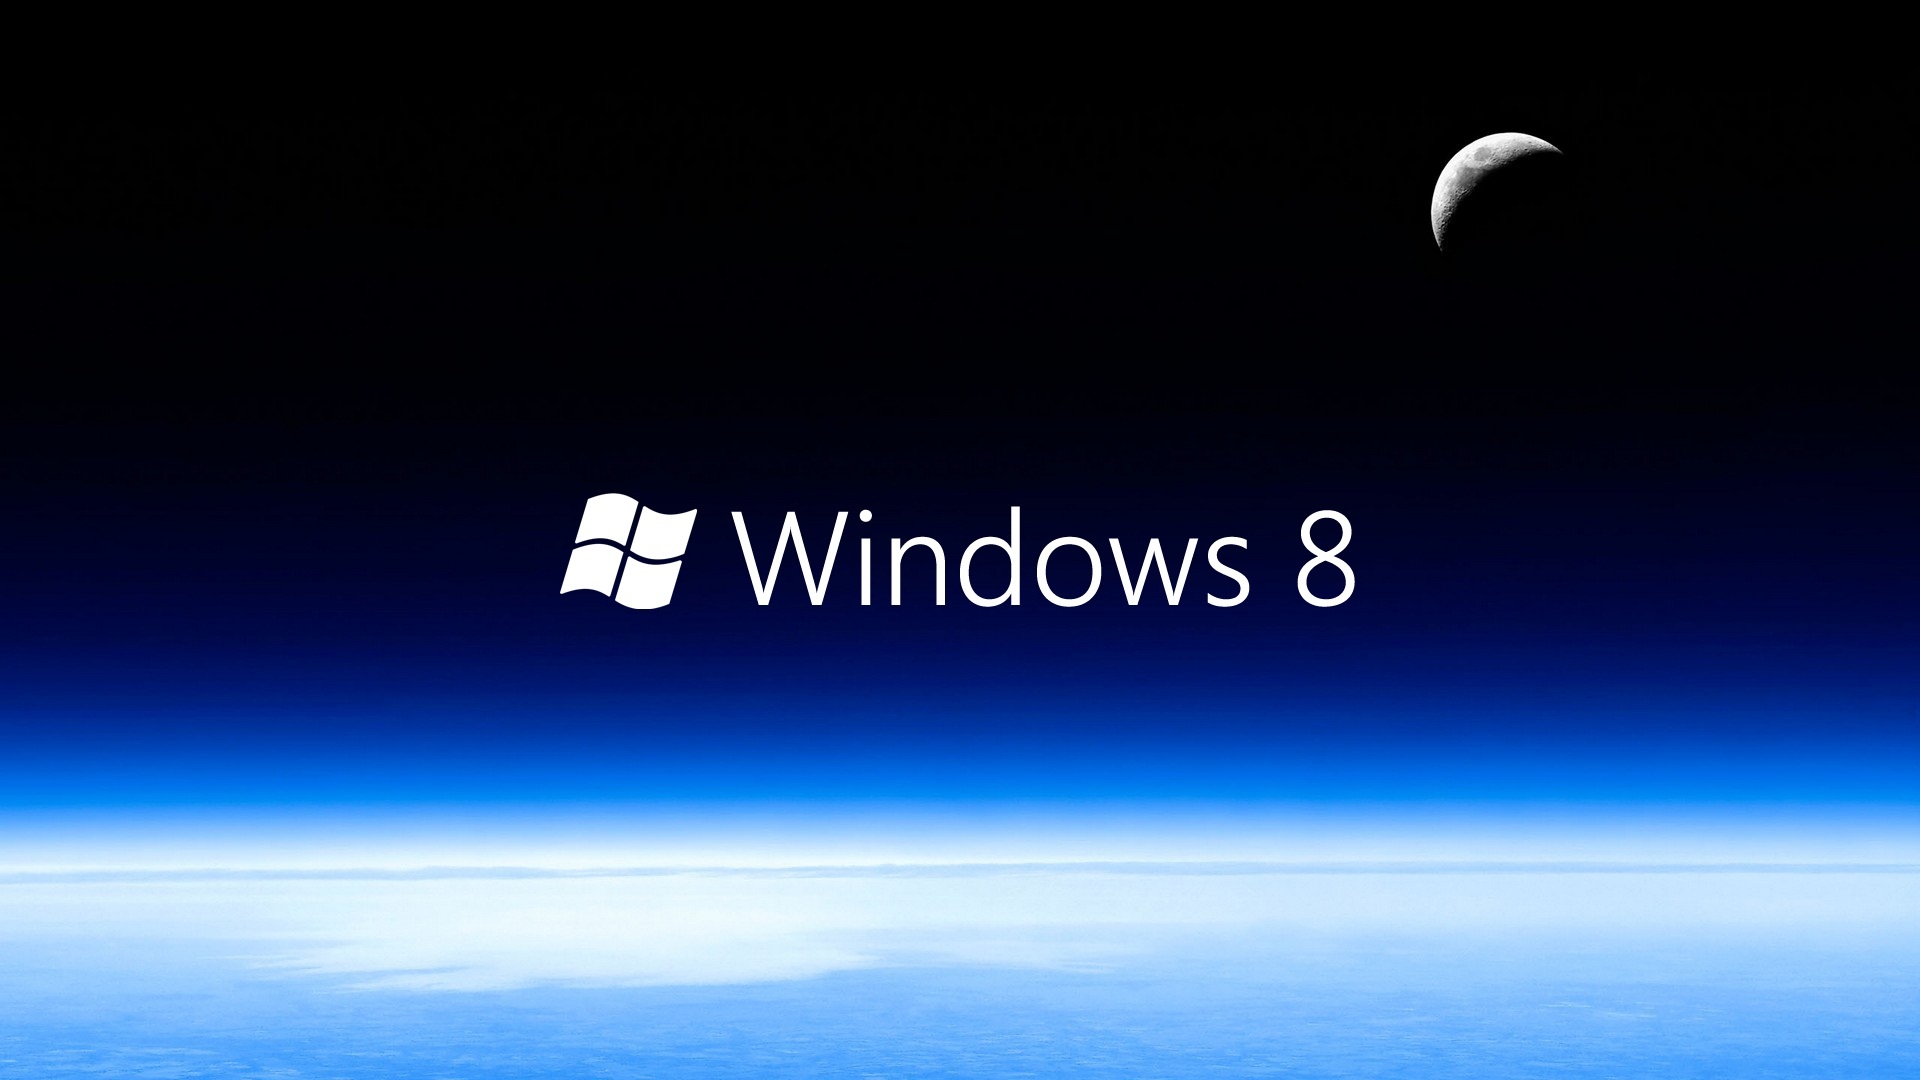 Moon Windows 8 HD Background Wallpaper Brands And Logos